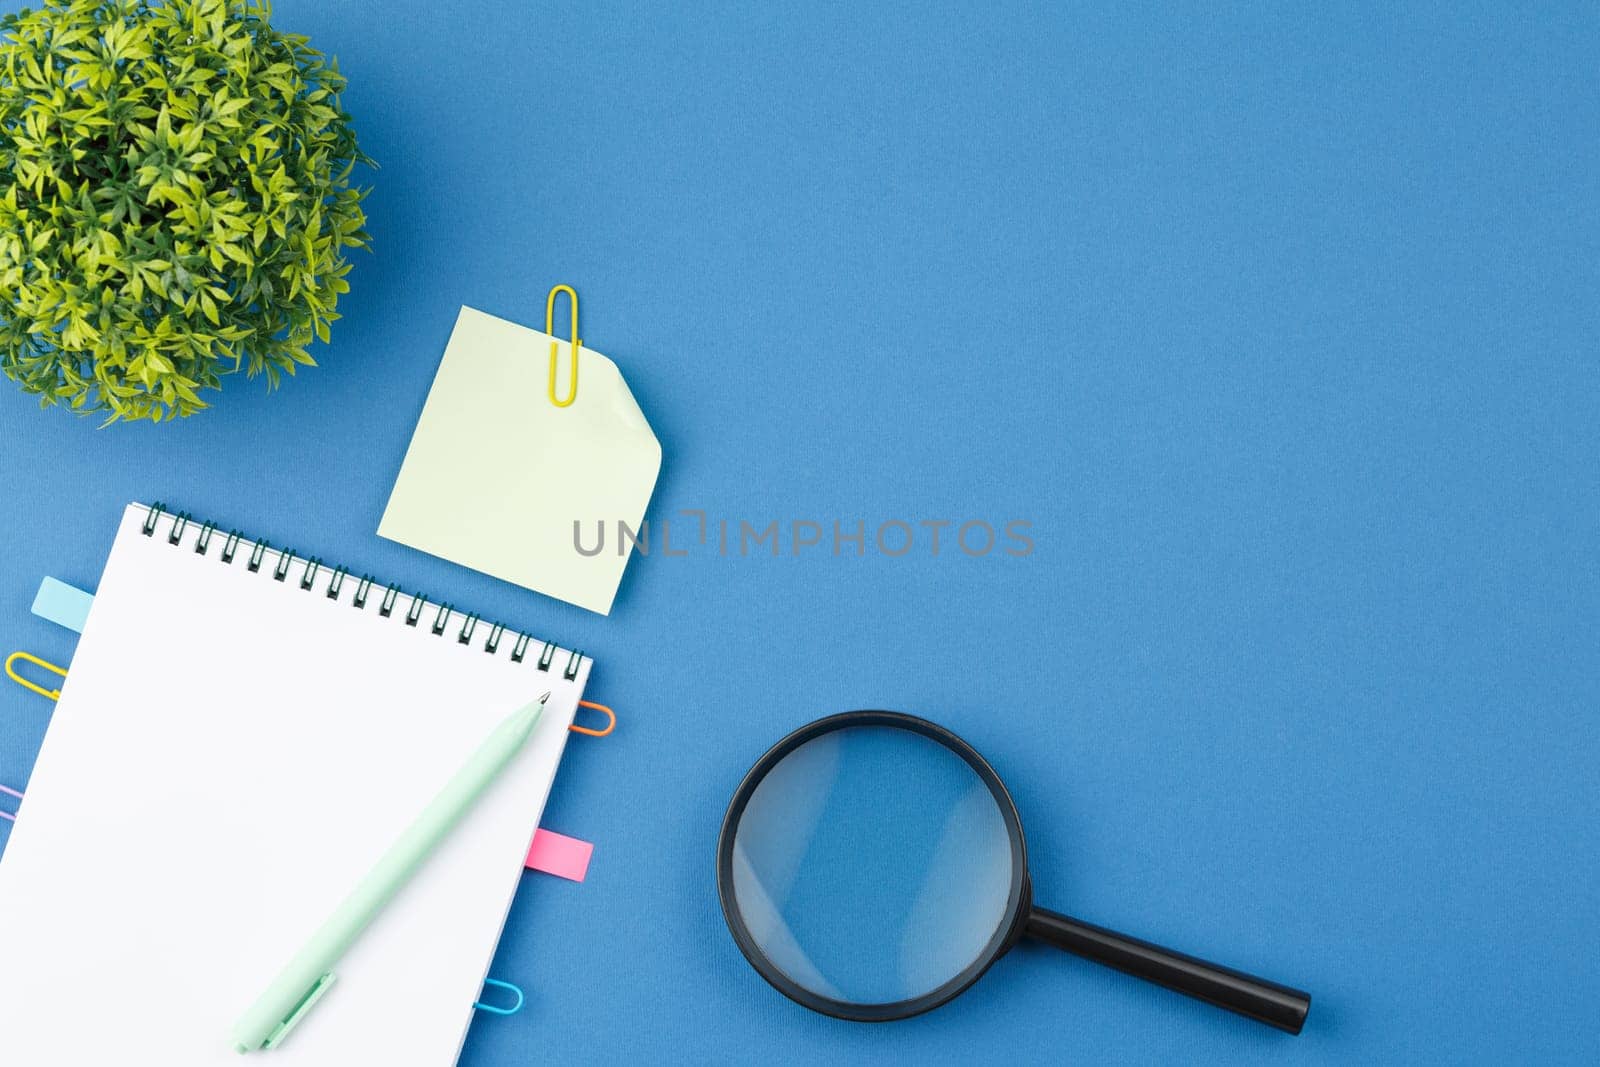 Spiral notebook with bookmarks from paper clips, note sheets, pen, magnifying glass and potted plant on blue isolated background. Office concept. Top view.